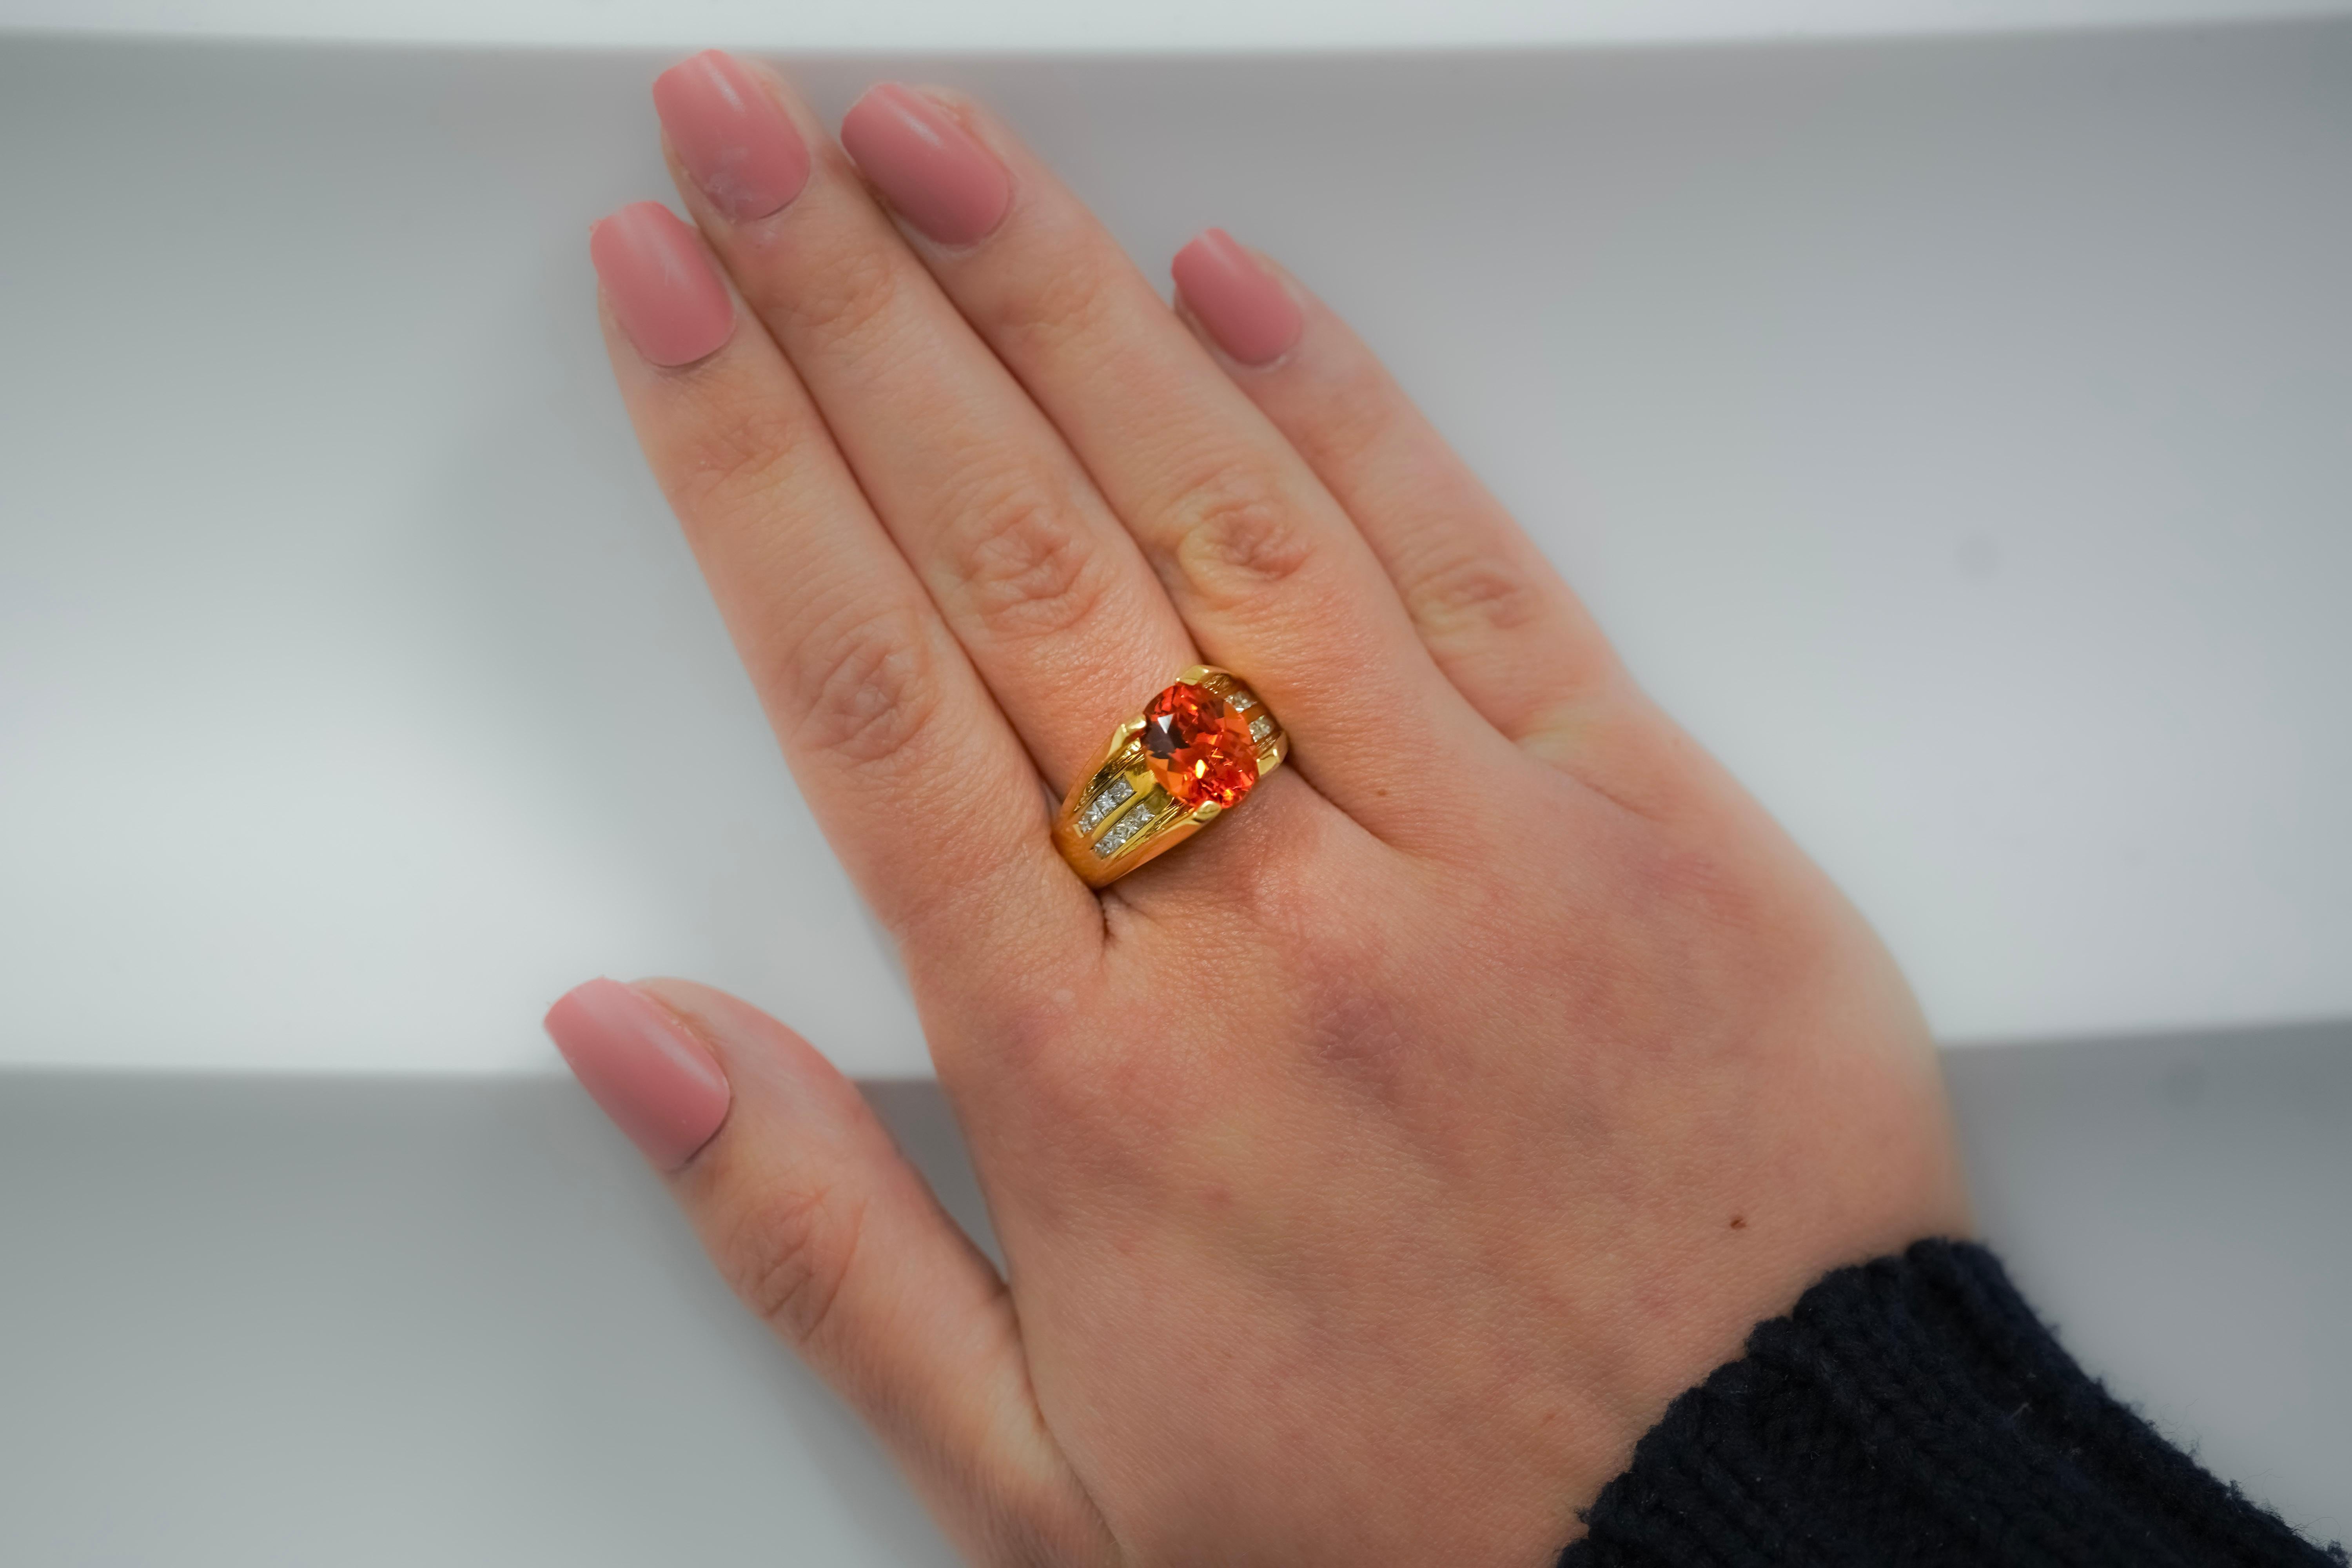 18K yellow gold oval cut Orange Spessartine Garnet and princess cut diamond ring. The Spessartine Garnet is mounted in a sharp, 4-prong setting that levitates the gem above the setting. Otherwise known as a floated set, for its optics as a gemstone